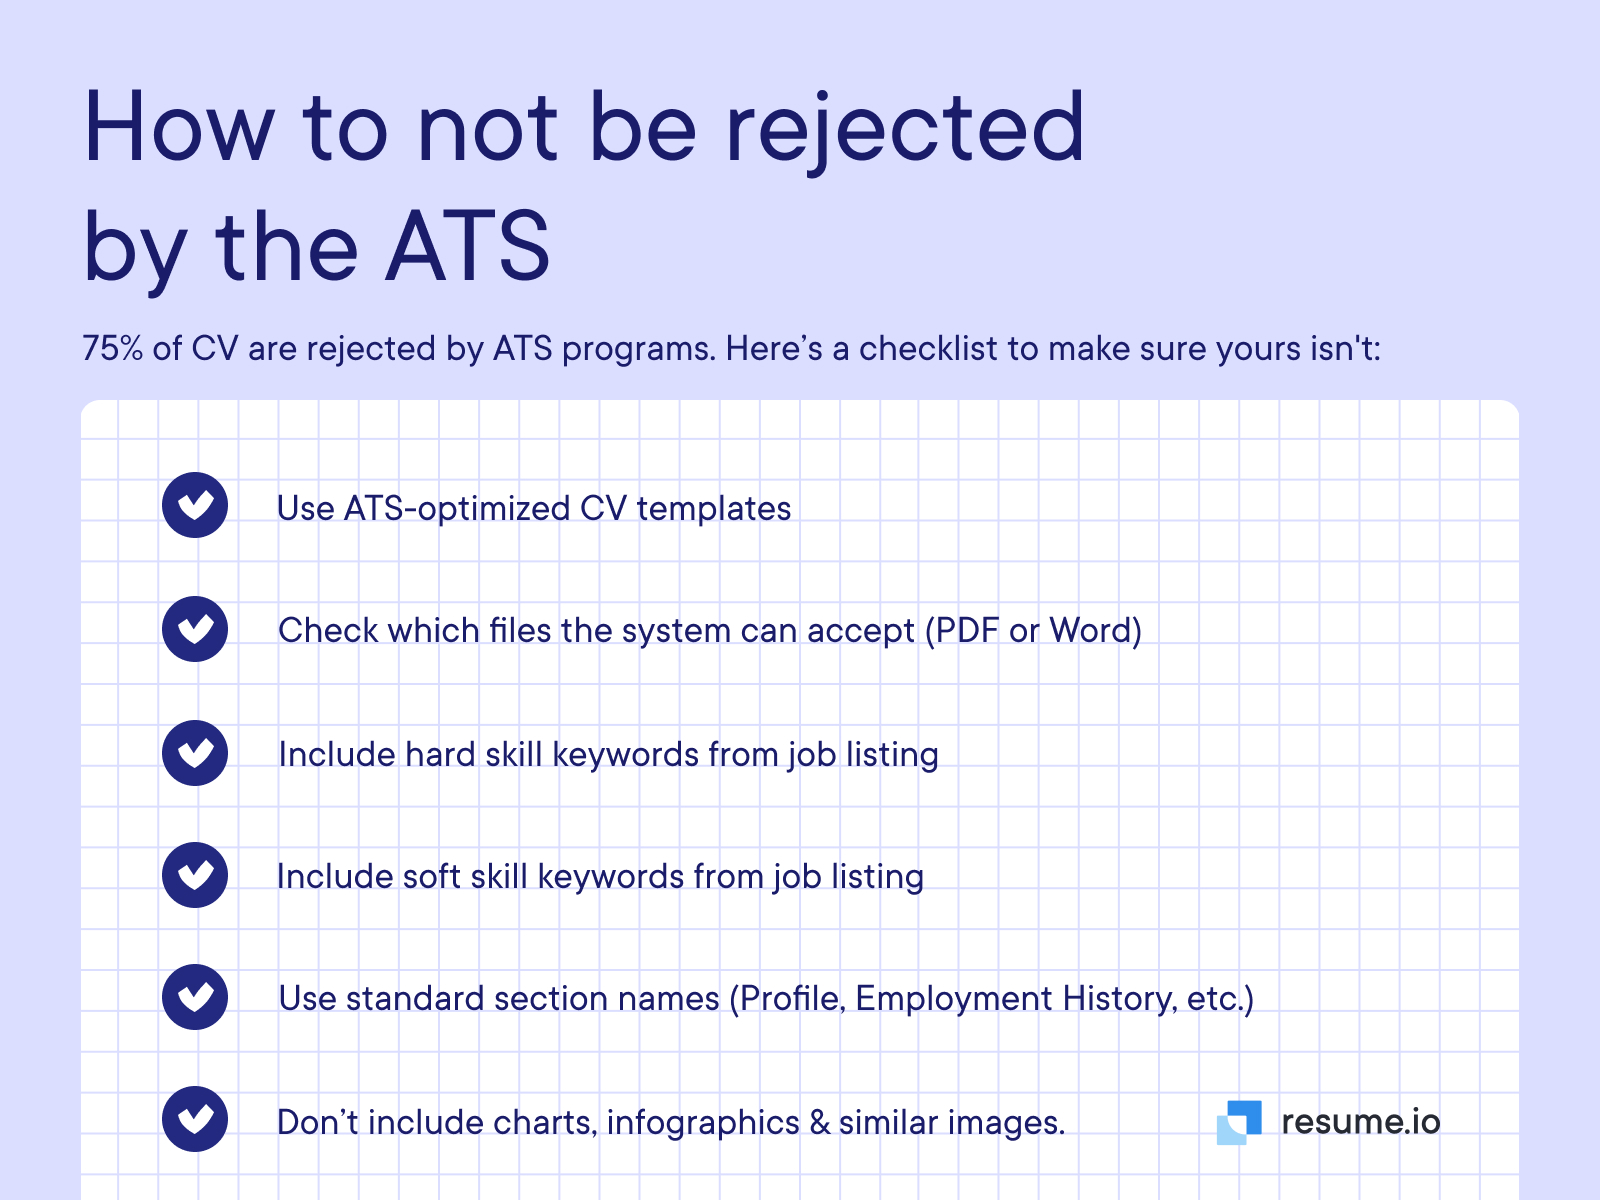 How to not be rejected by the ATS